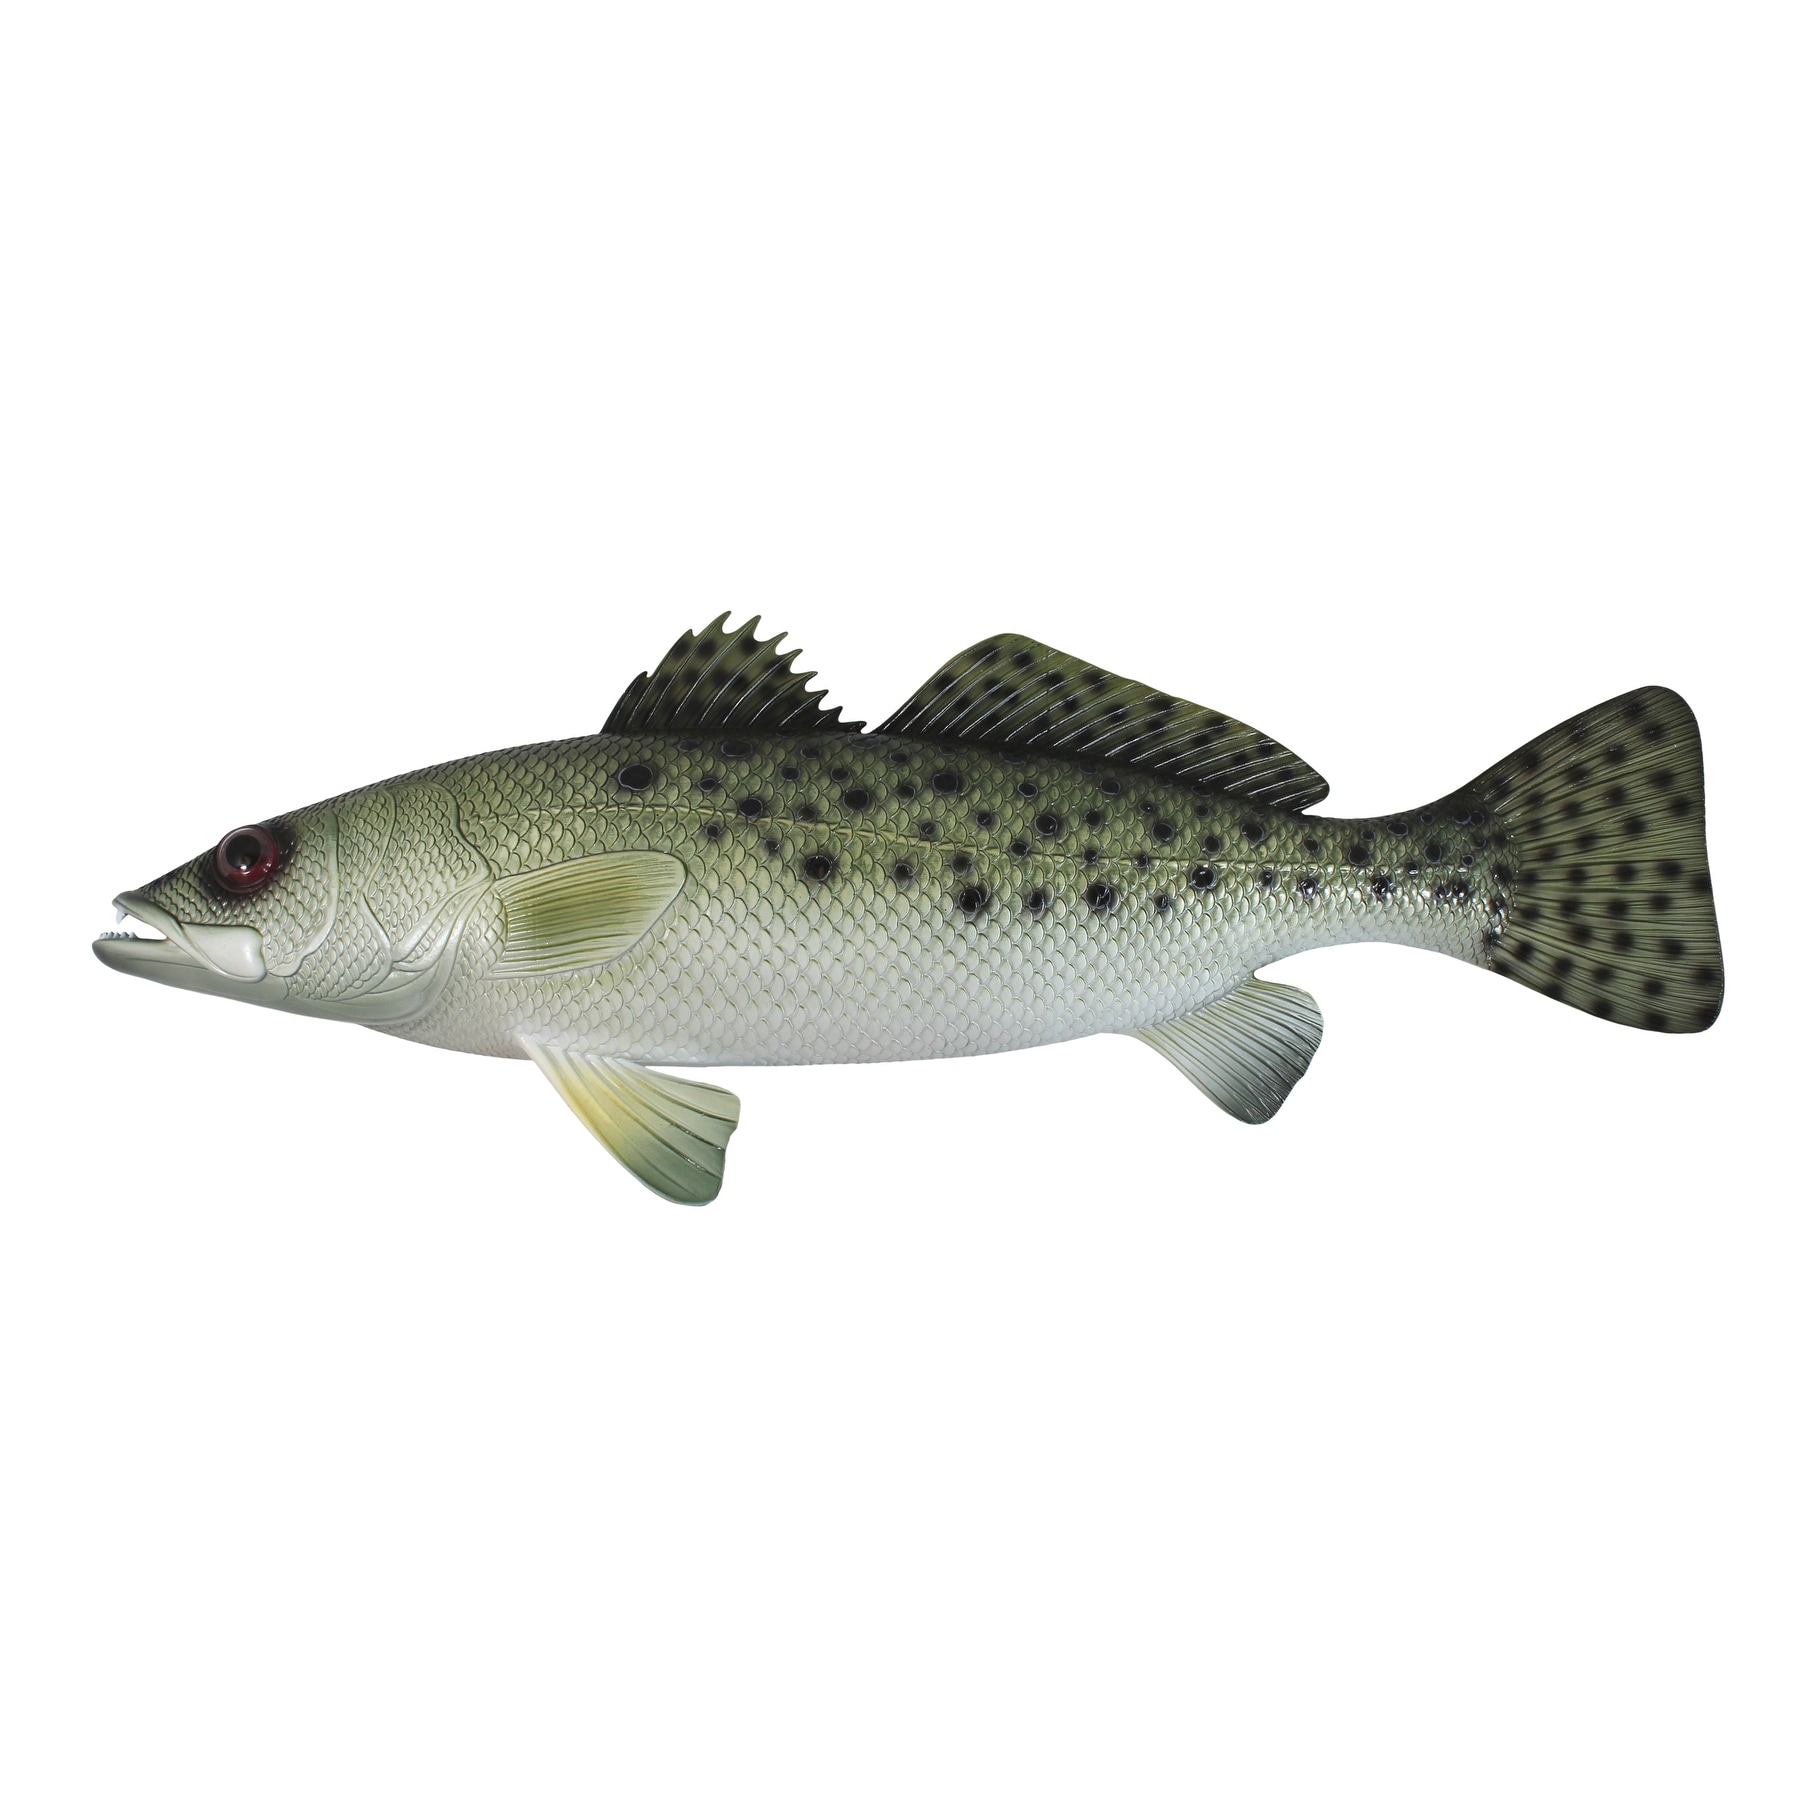 Spotted Sea Trout Replica Nautical Saltwater Fishing Wall Decor 28